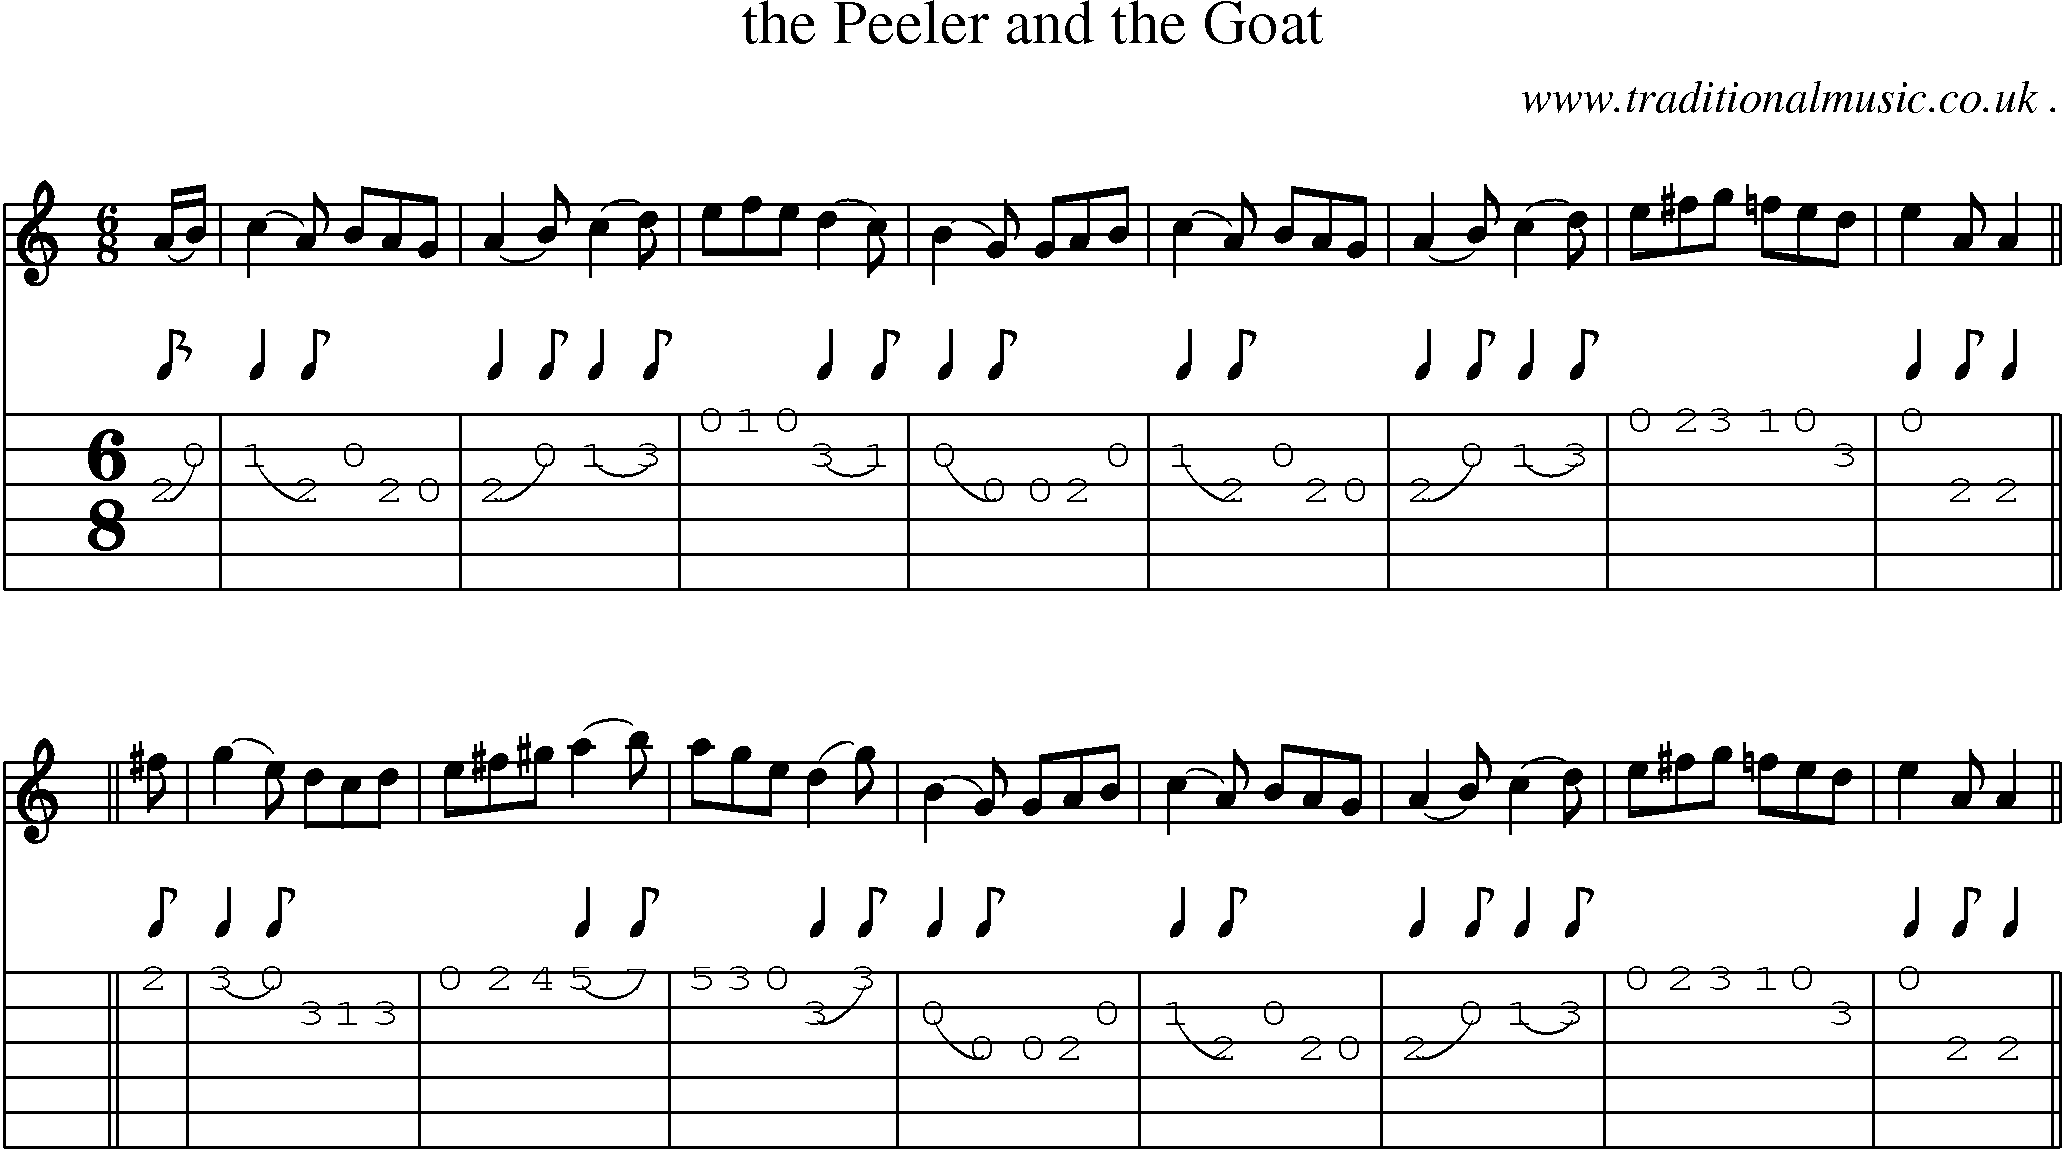 Sheet-music  score, Chords and Guitar Tabs for The Peeler And The Goat